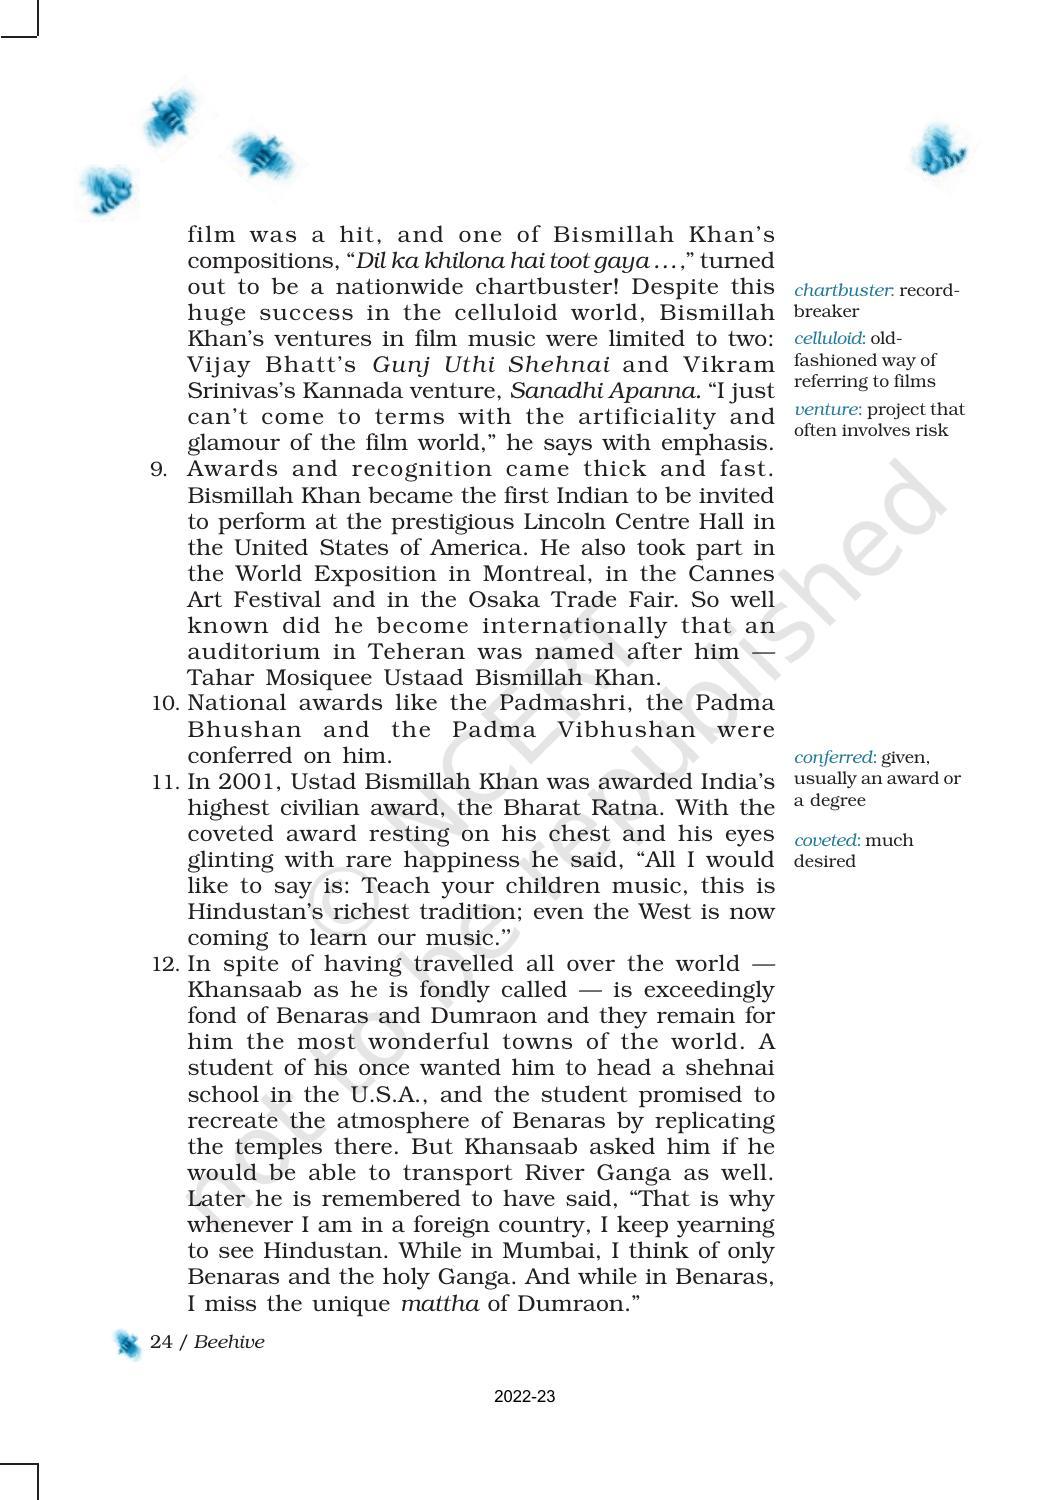 NCERT Book for Class 9 English Chapter 2 The Sound of Music - Page 8